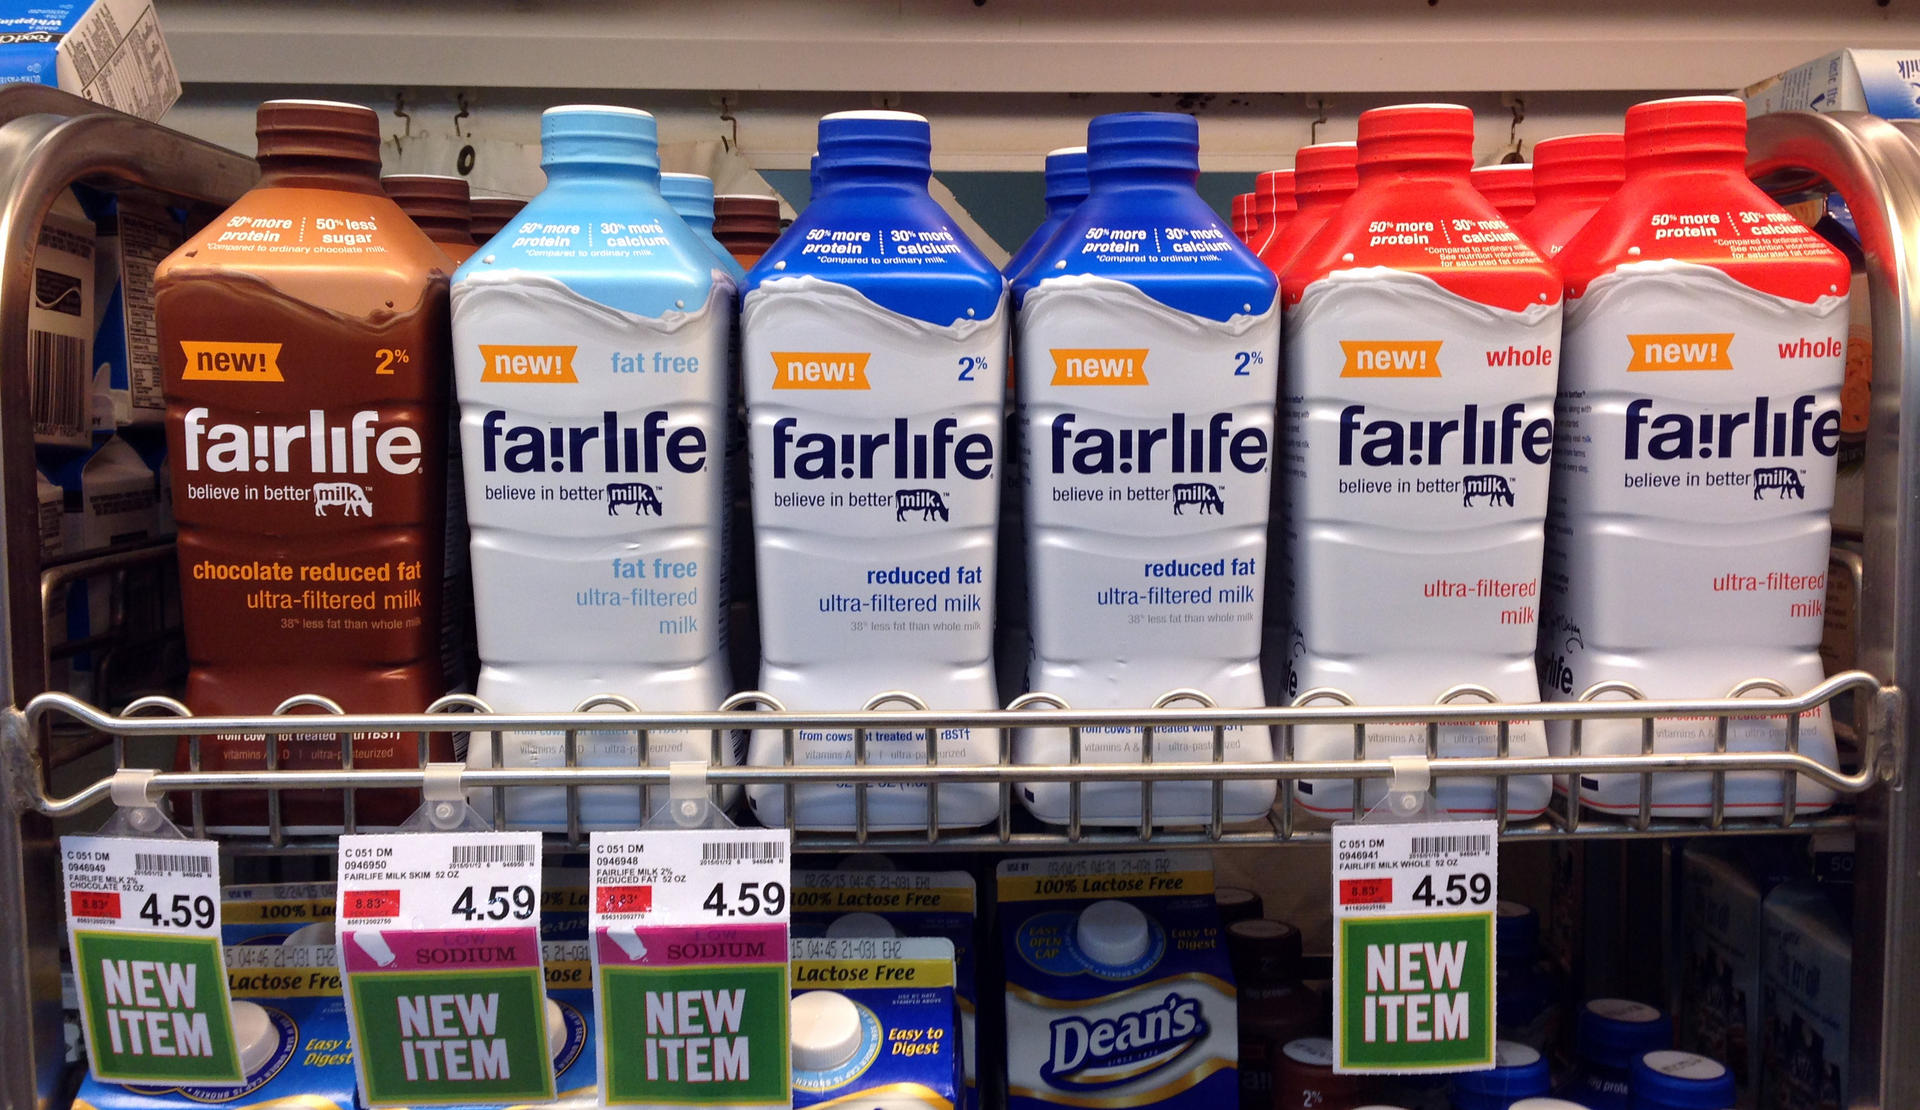 Fairlife milk products at an Indianapolis grocery store. Photo: AP